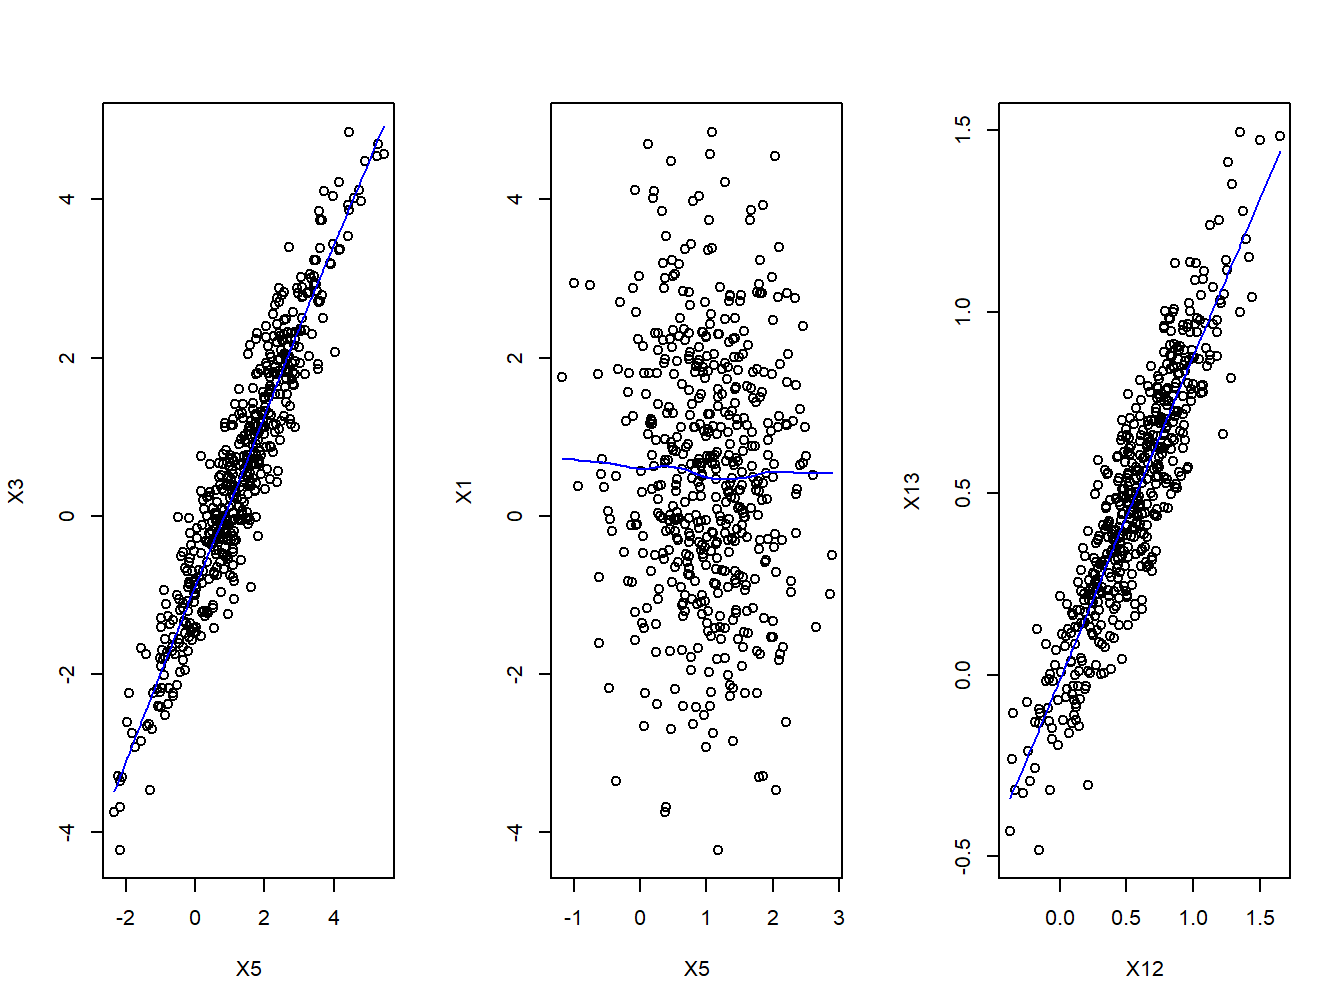 Scatter plots of paris of exposures in the simulated data